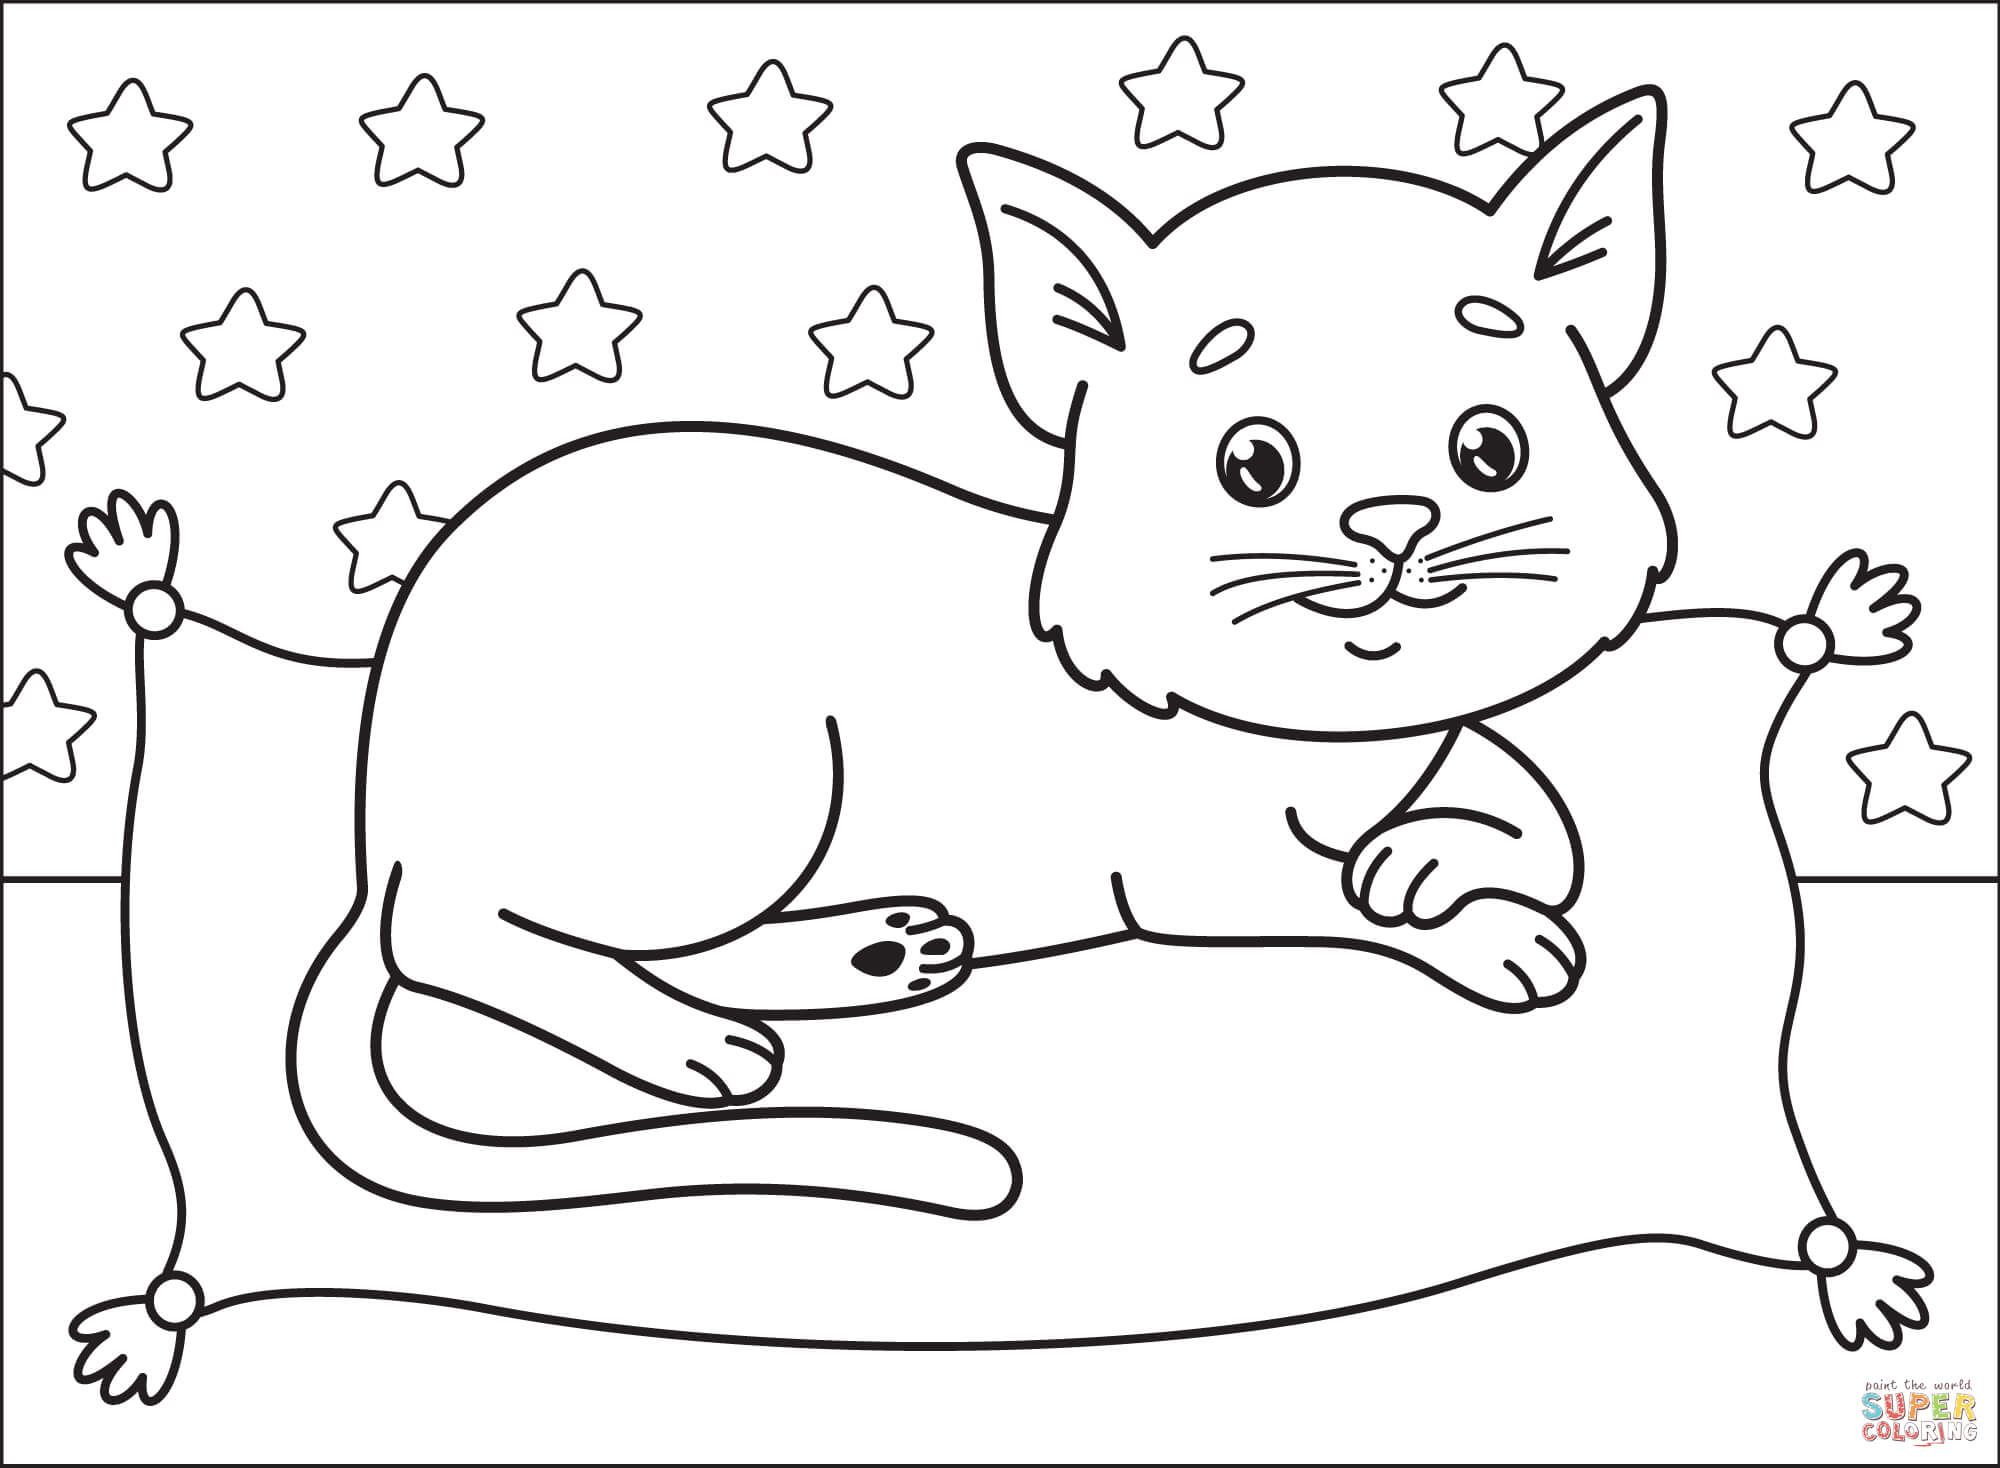 Black cat coloring page free printable coloring pages